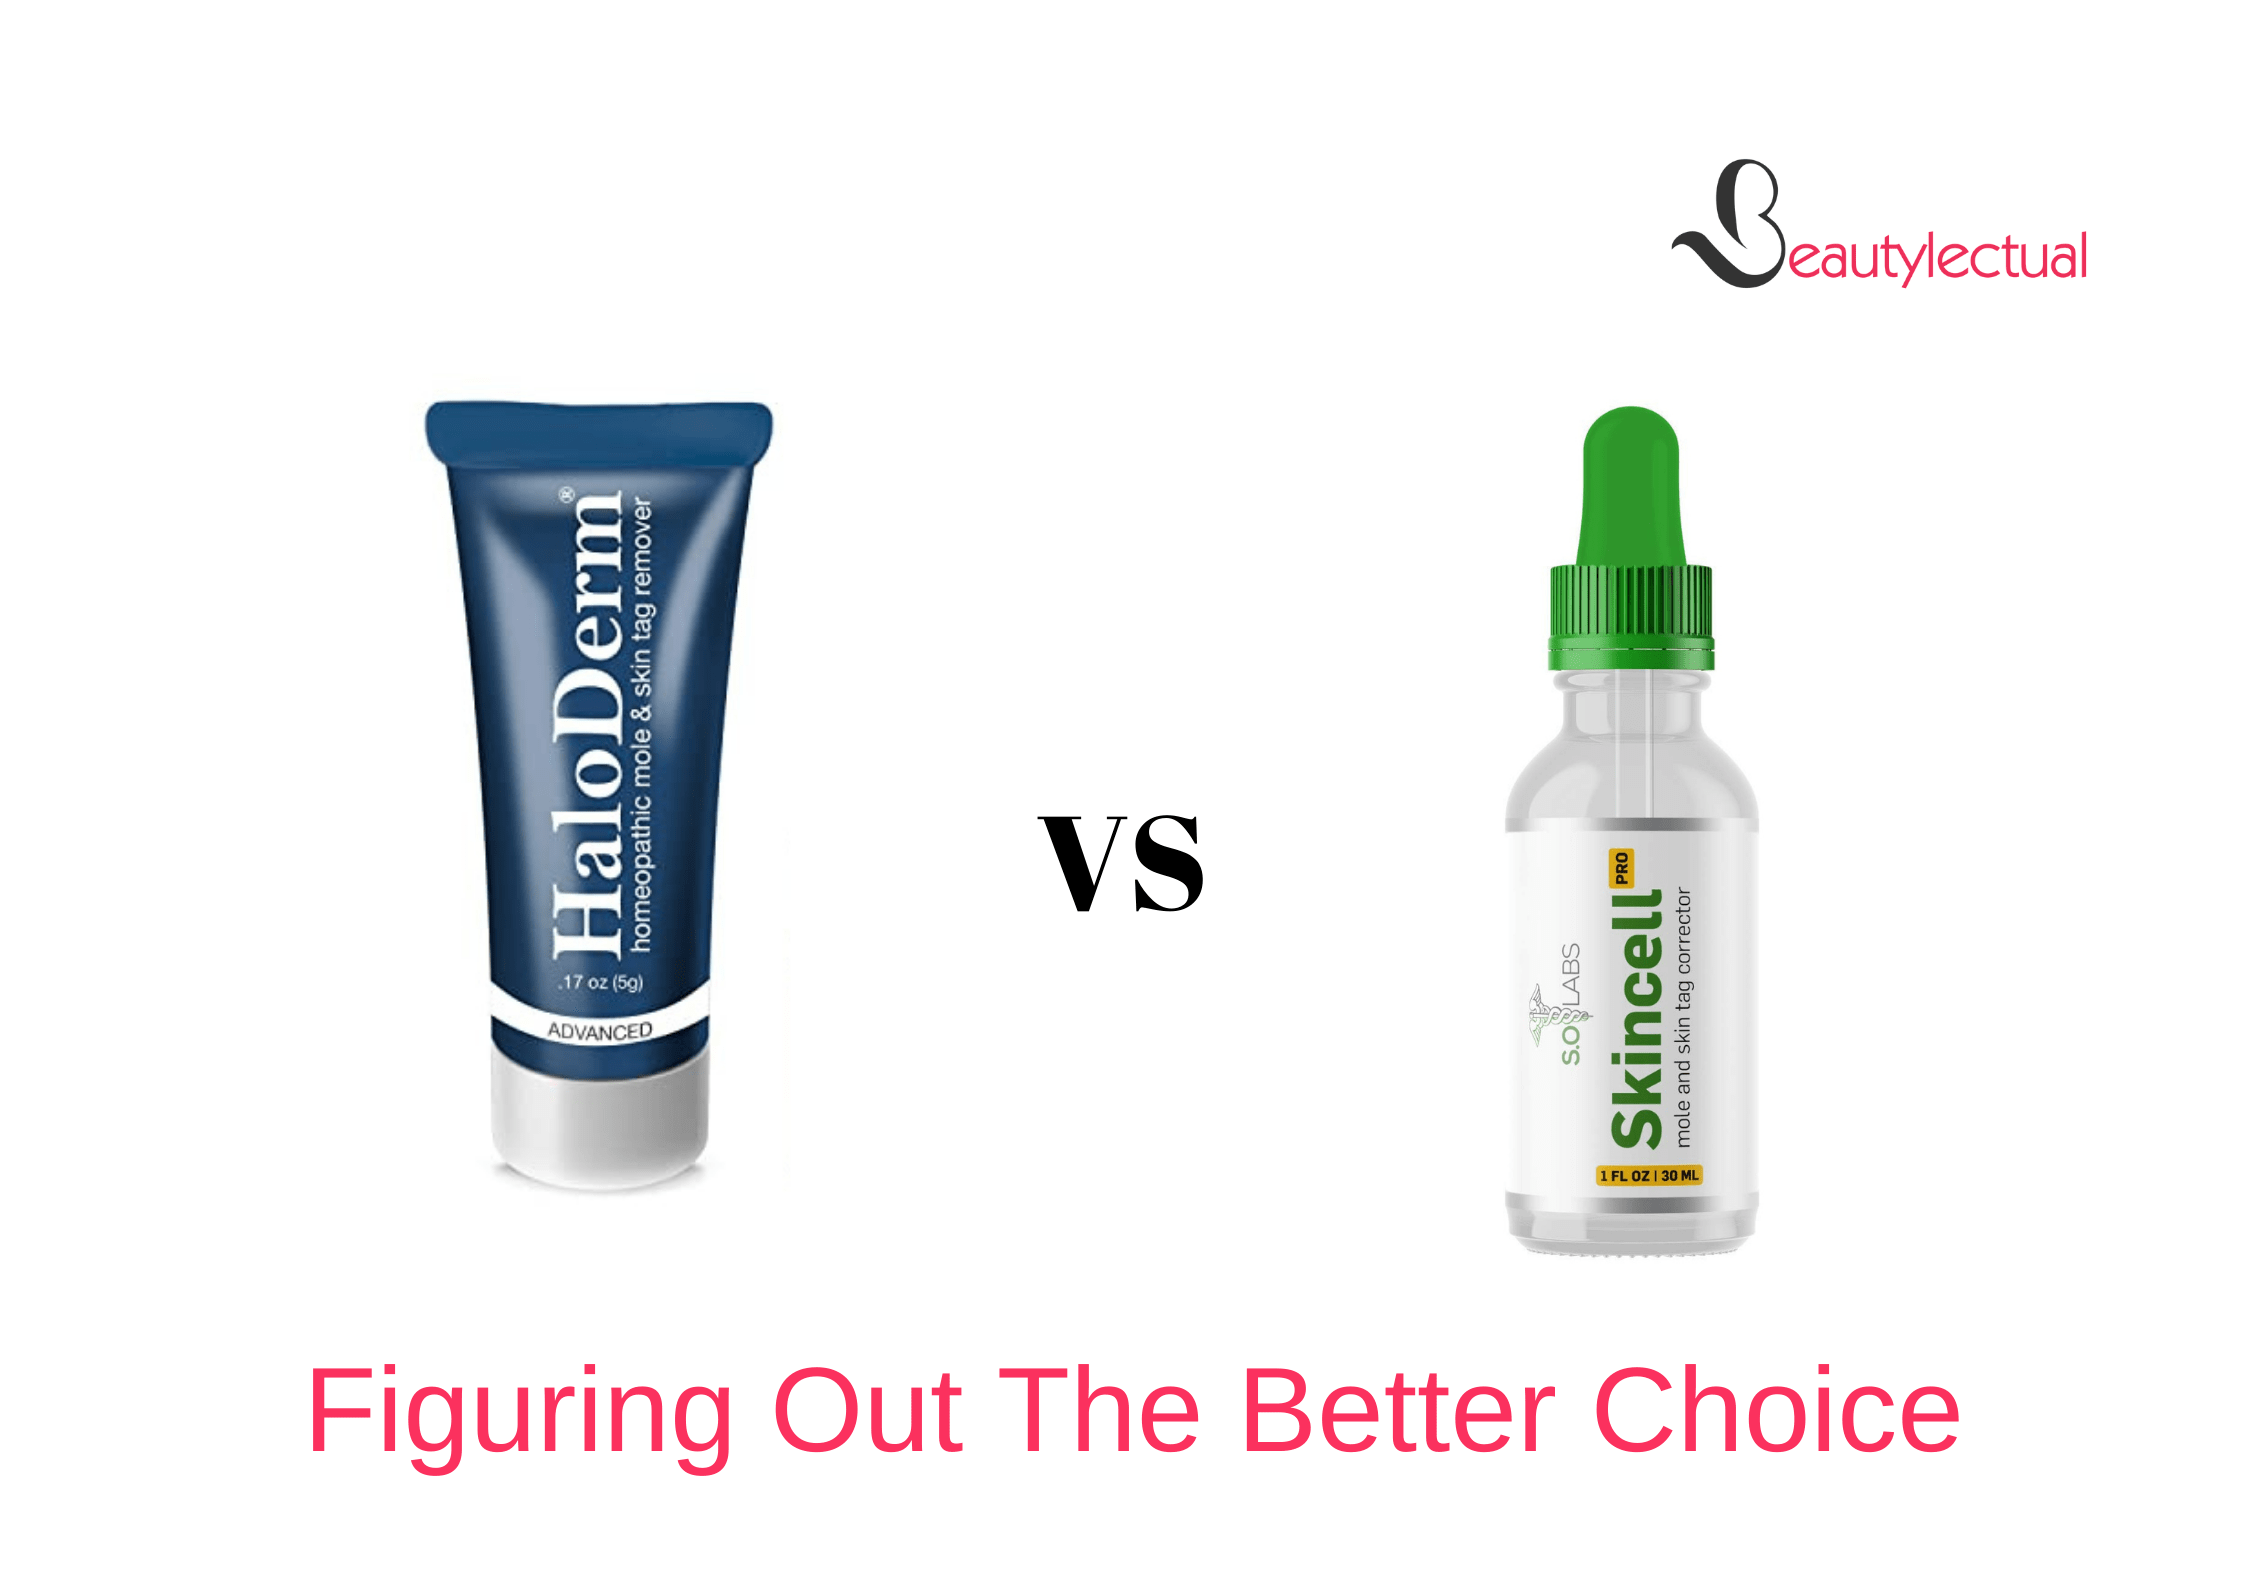 Haloderm VS Skincell Pro